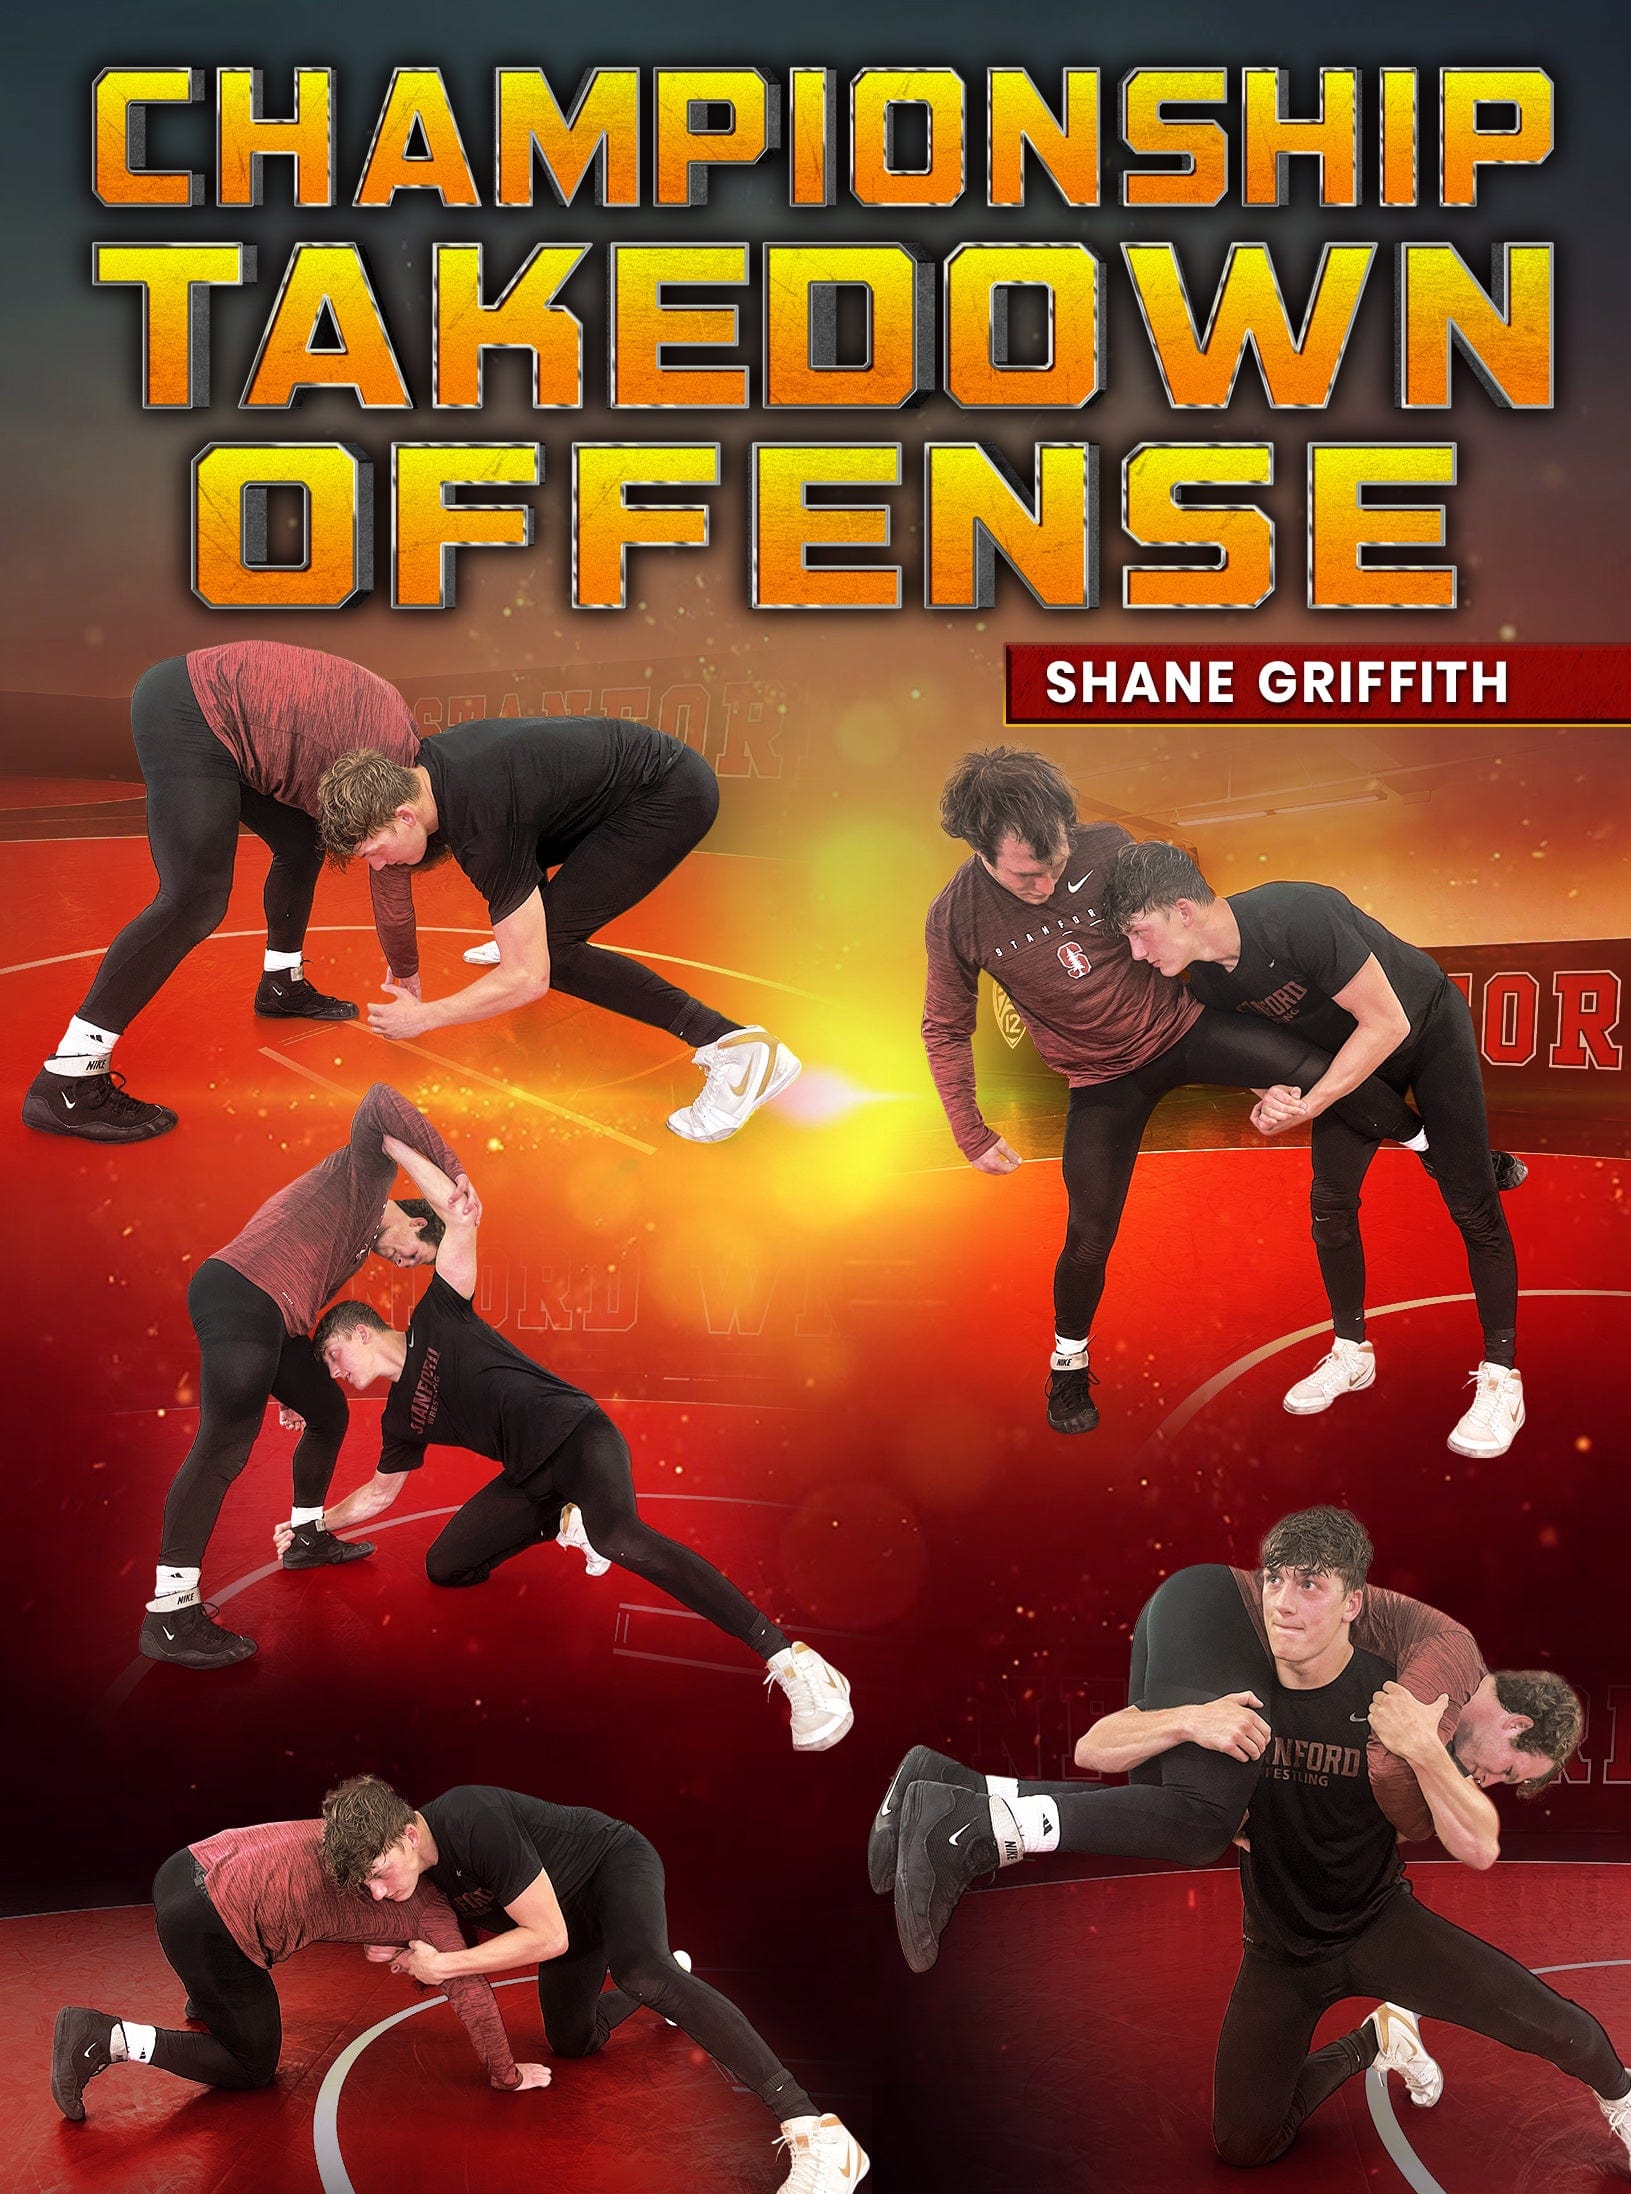 Championship Takedown Offense by Shane Griffith - Fanatic Wrestling